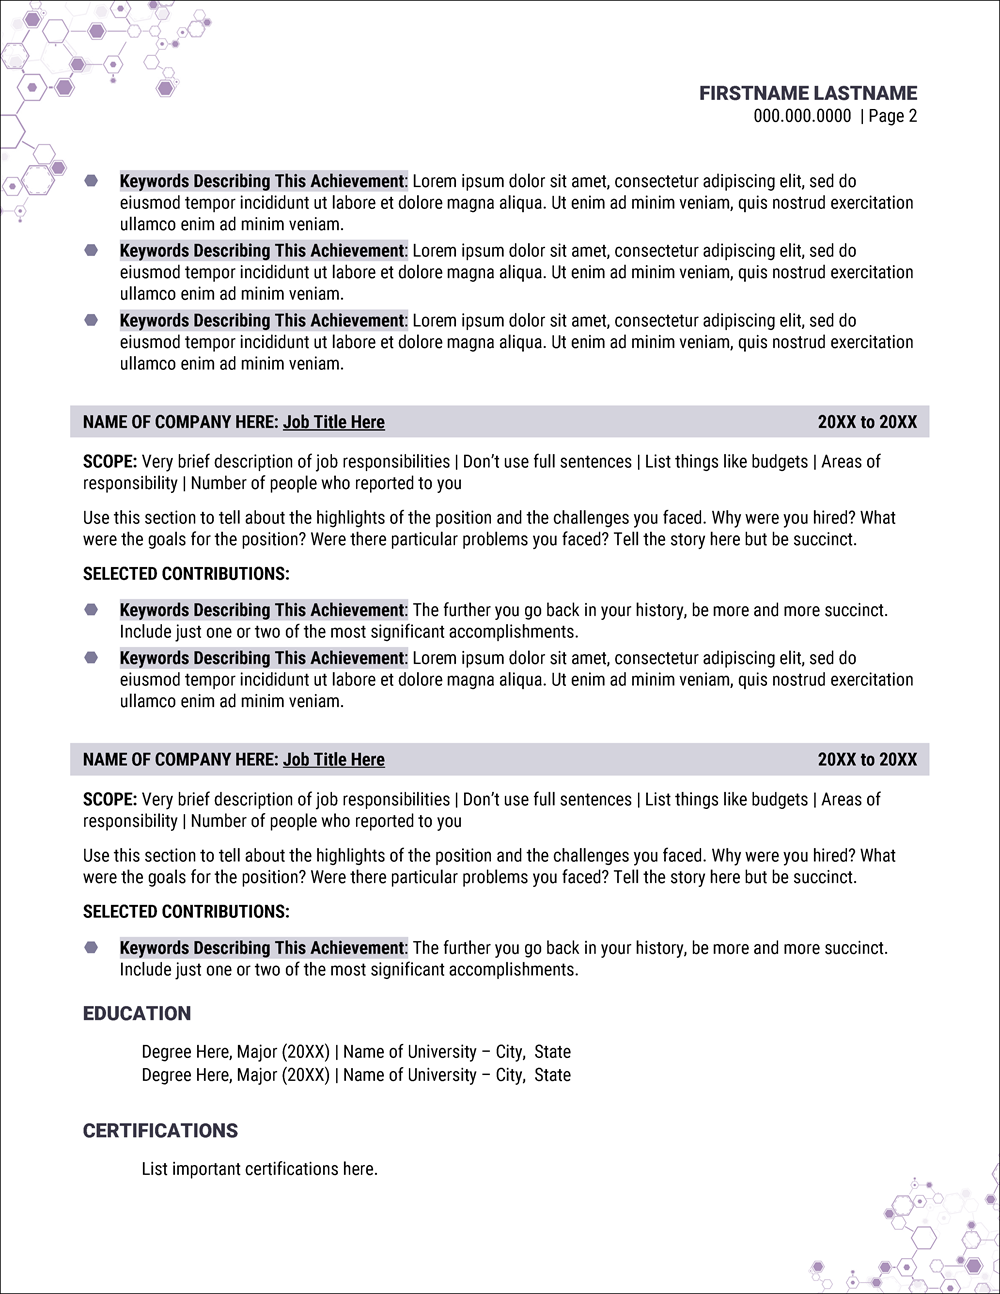 Resume Template for Technical Jobs Page 2